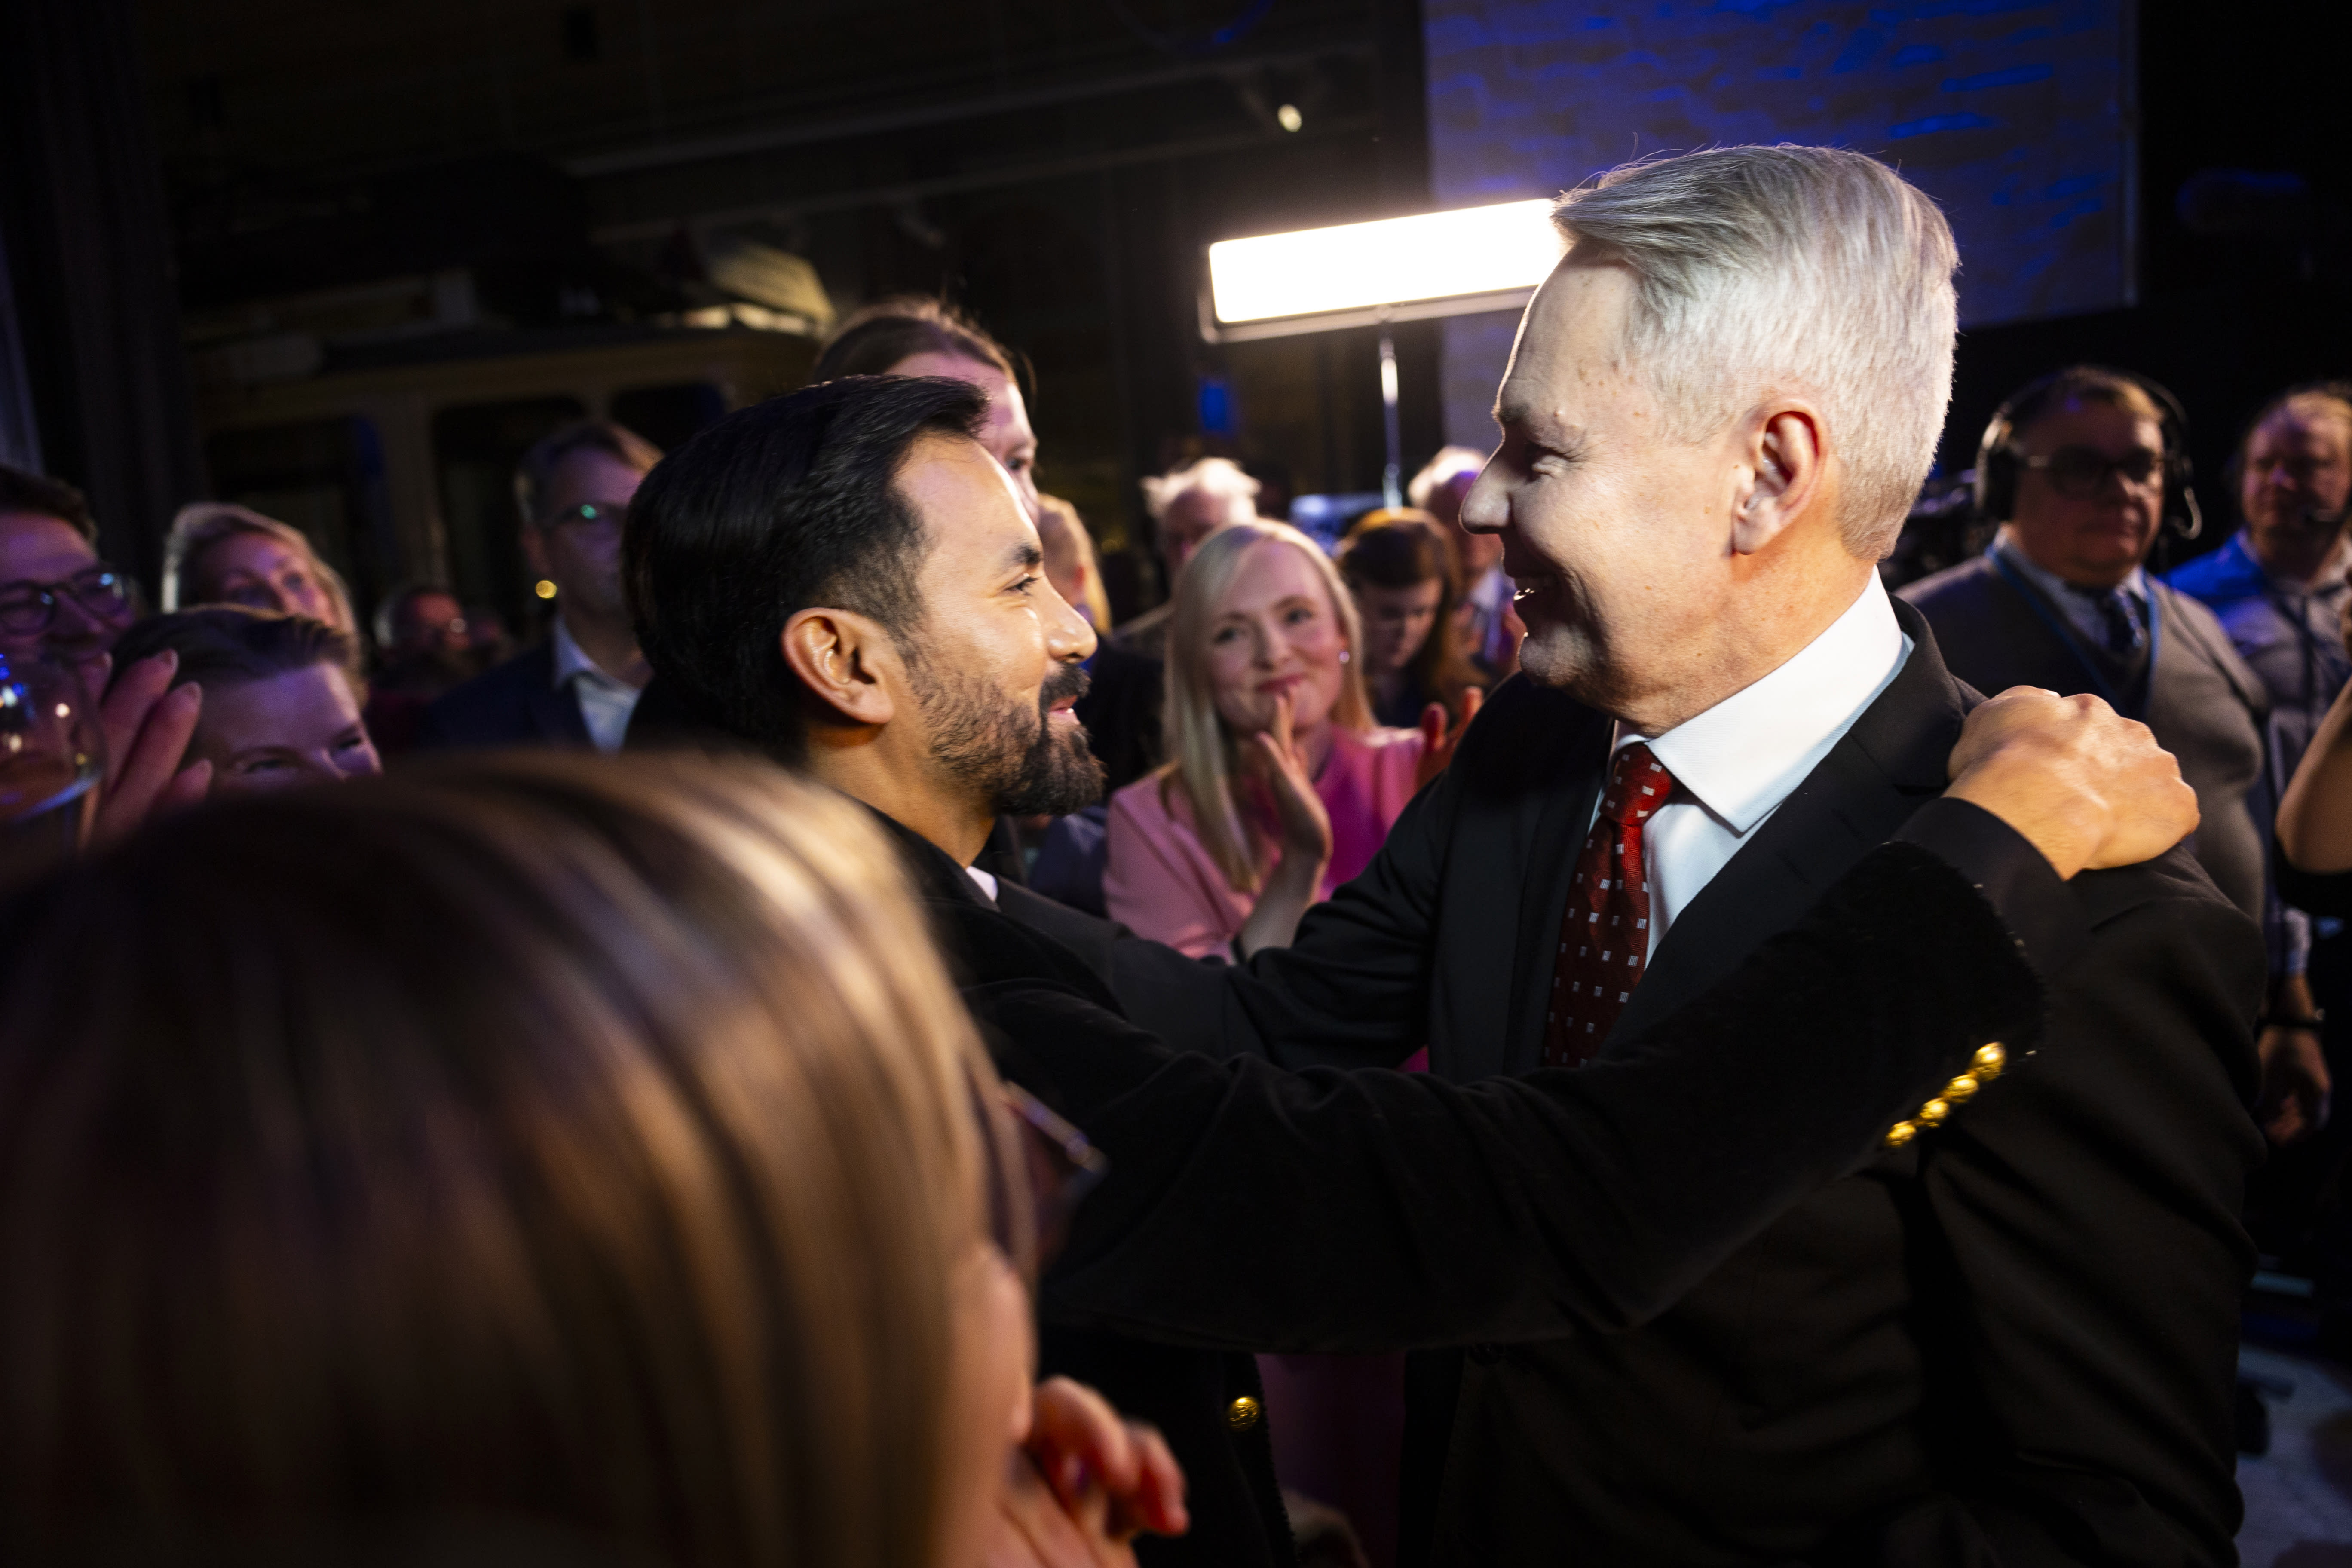 Survey: One in three does not vote for Pekka Haavisto because of his partner